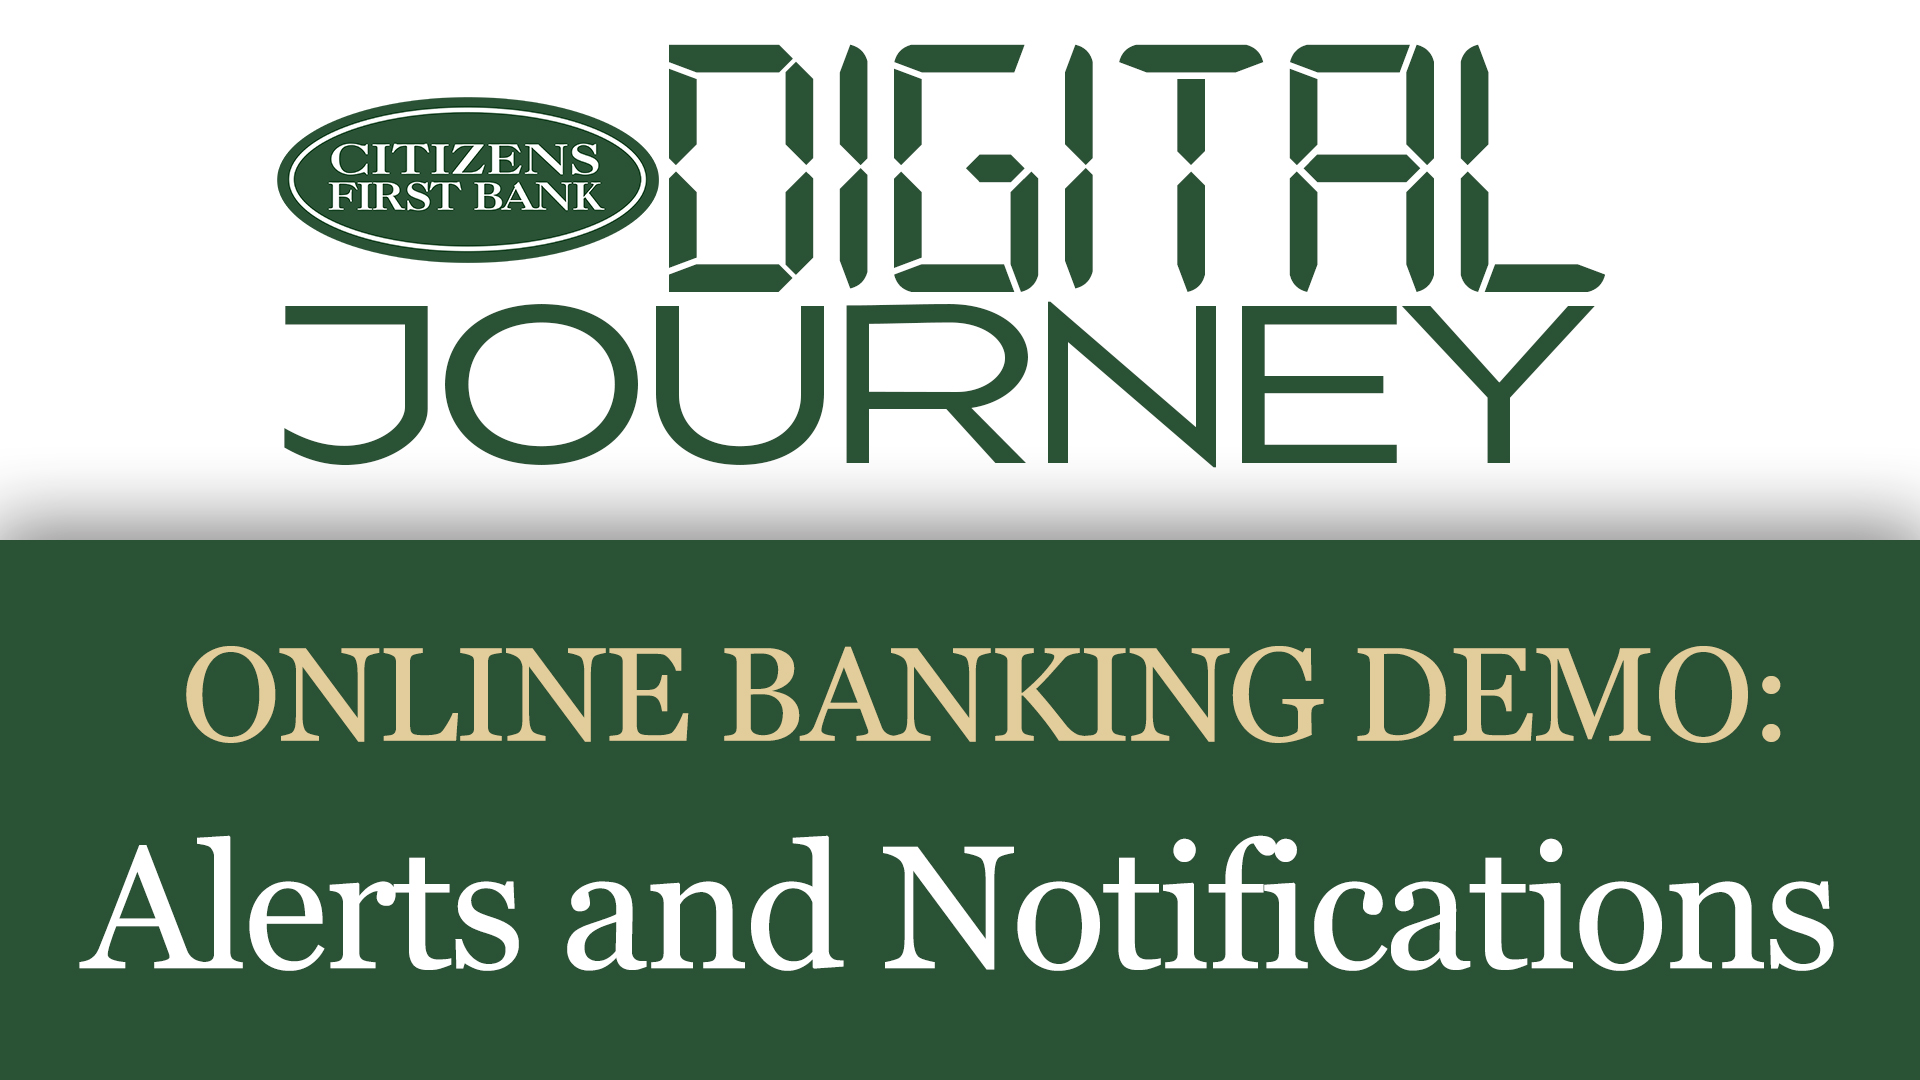 Digital Journey logo with our online banking demo: Alerts and Notifications